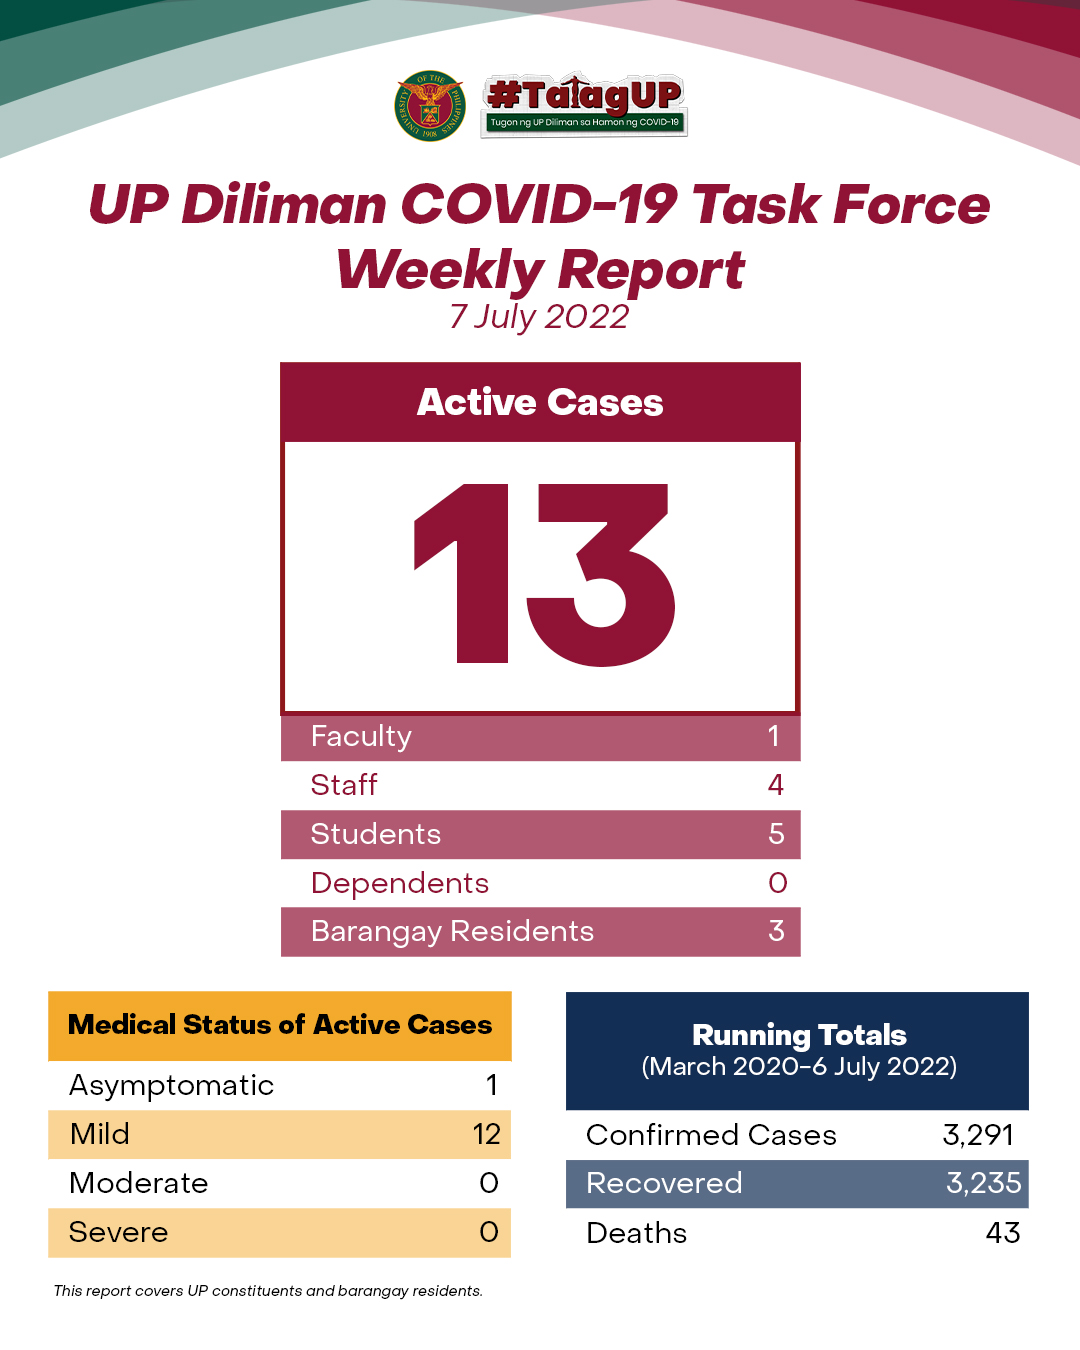 UP Diliman COVID-19 Task Force Weekly Report (7 July 2022)